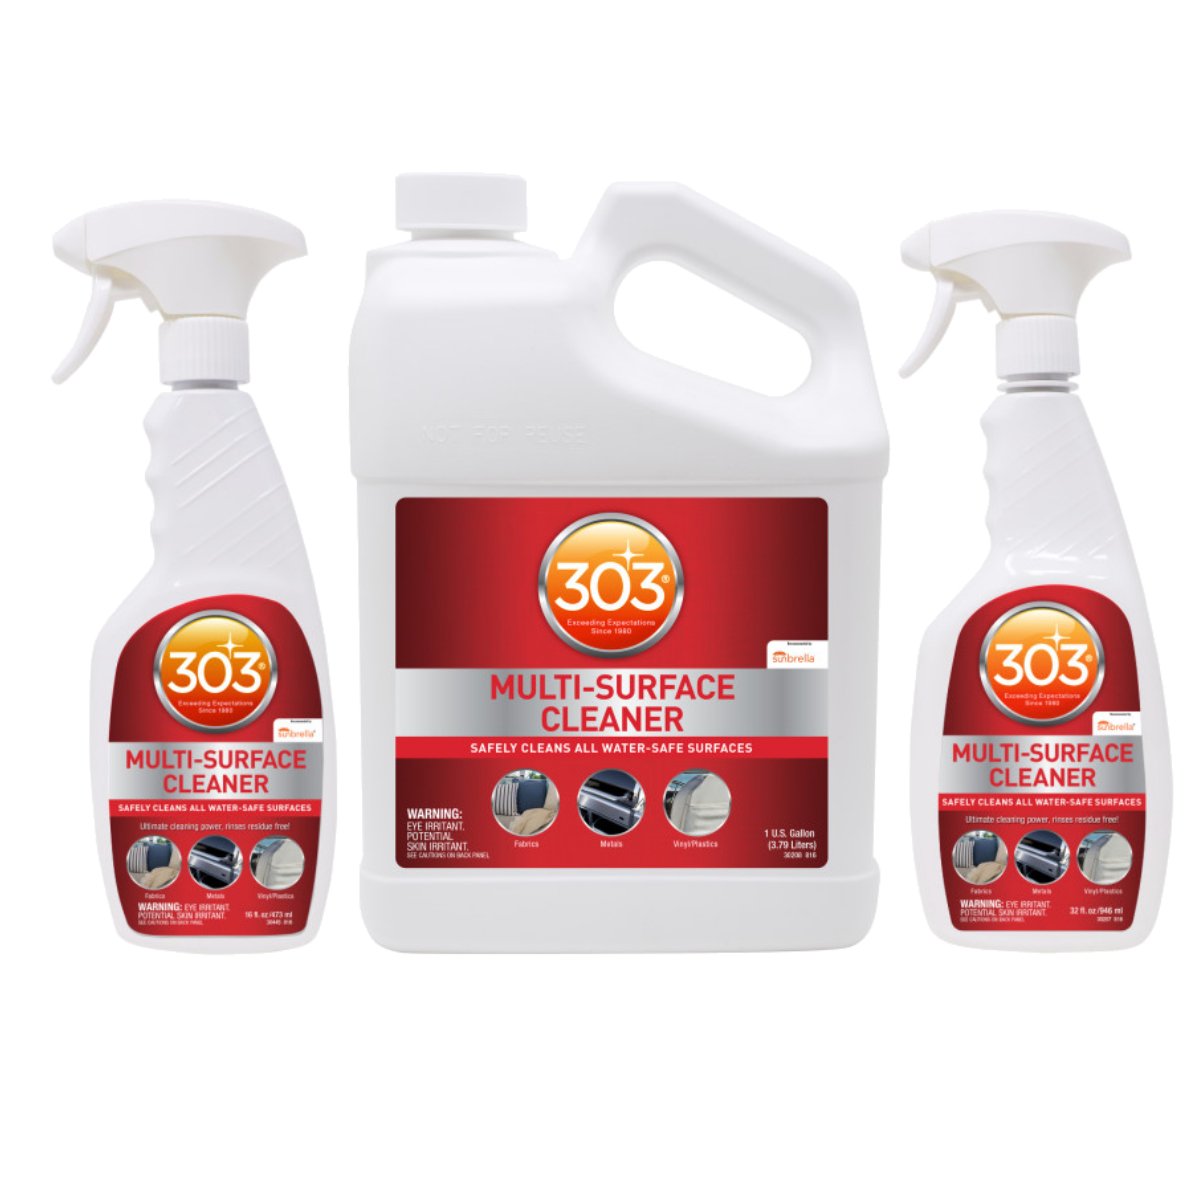 All-in-One Multi-Surface Vehicle Cleaner from 303